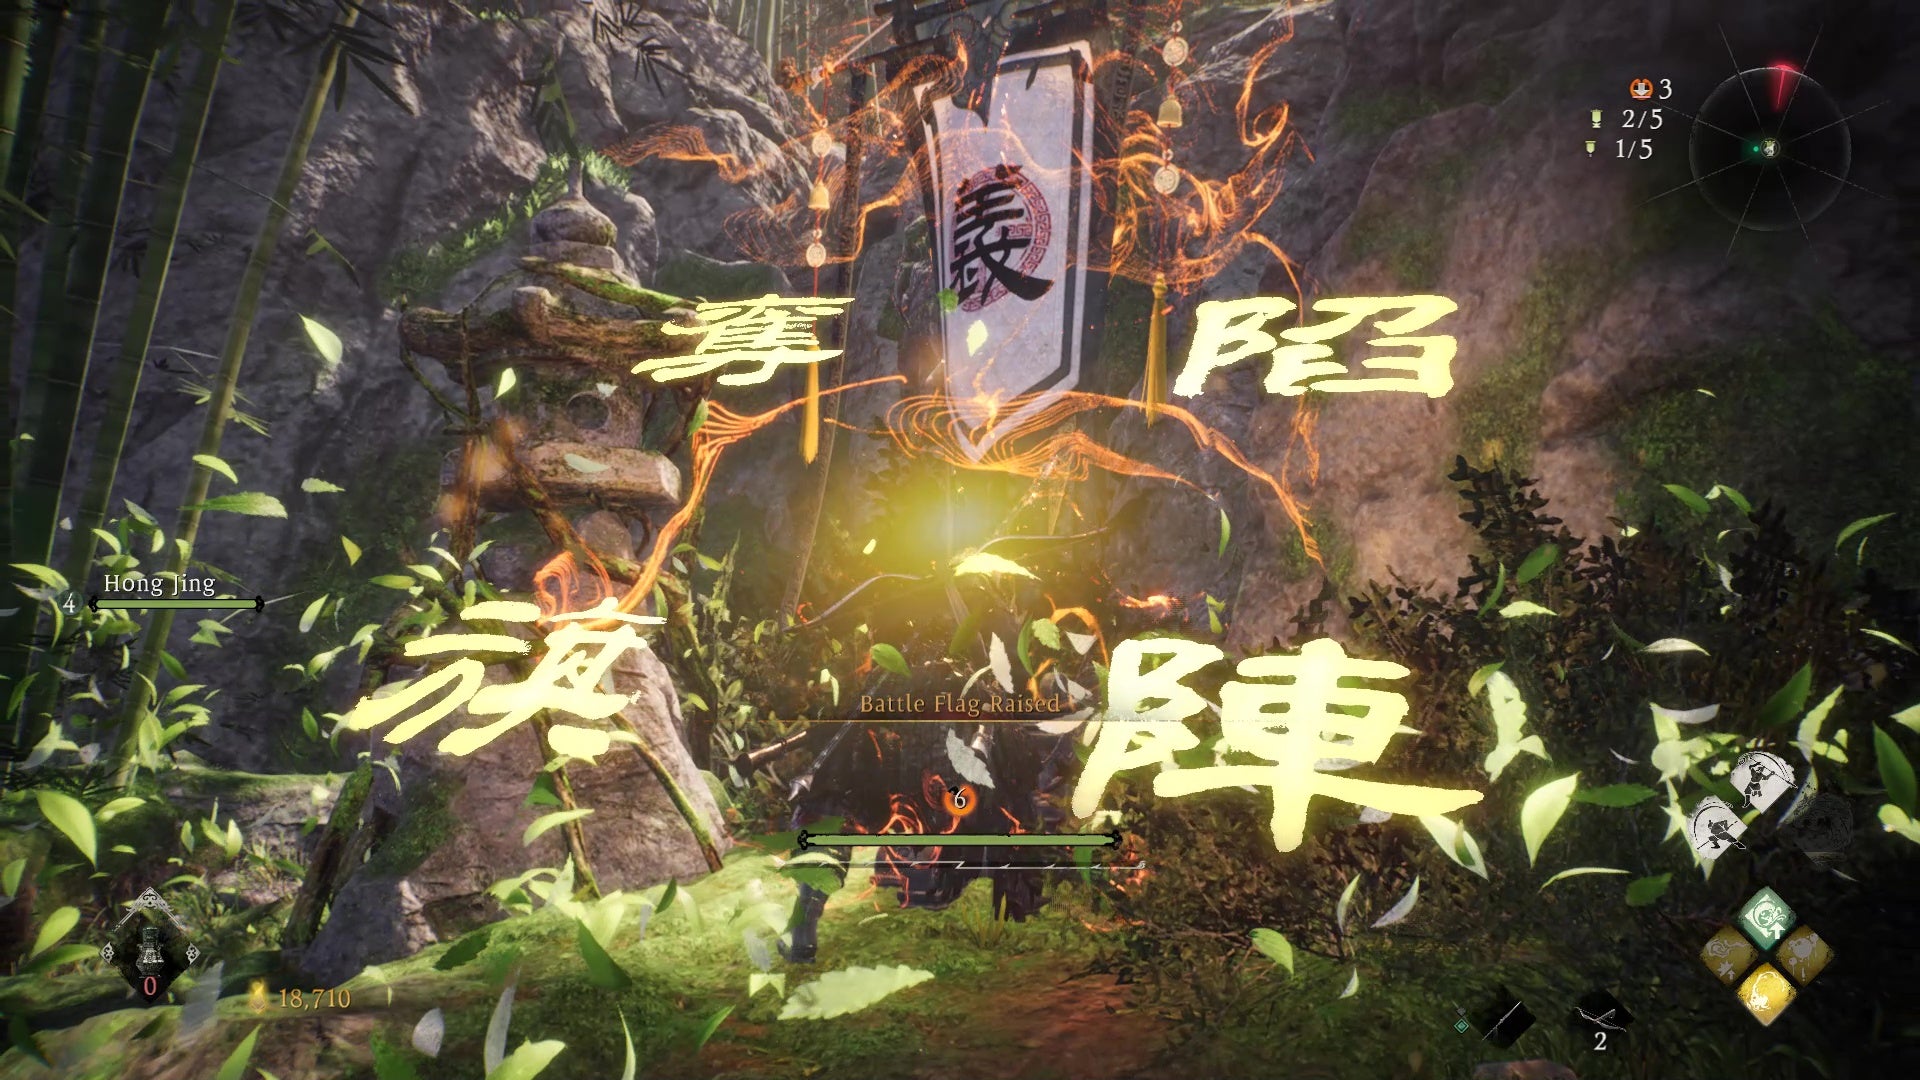 The player slams a Battle Flag down, creating a big rustle of leaves in Wo Long: Fallen Dynasty.